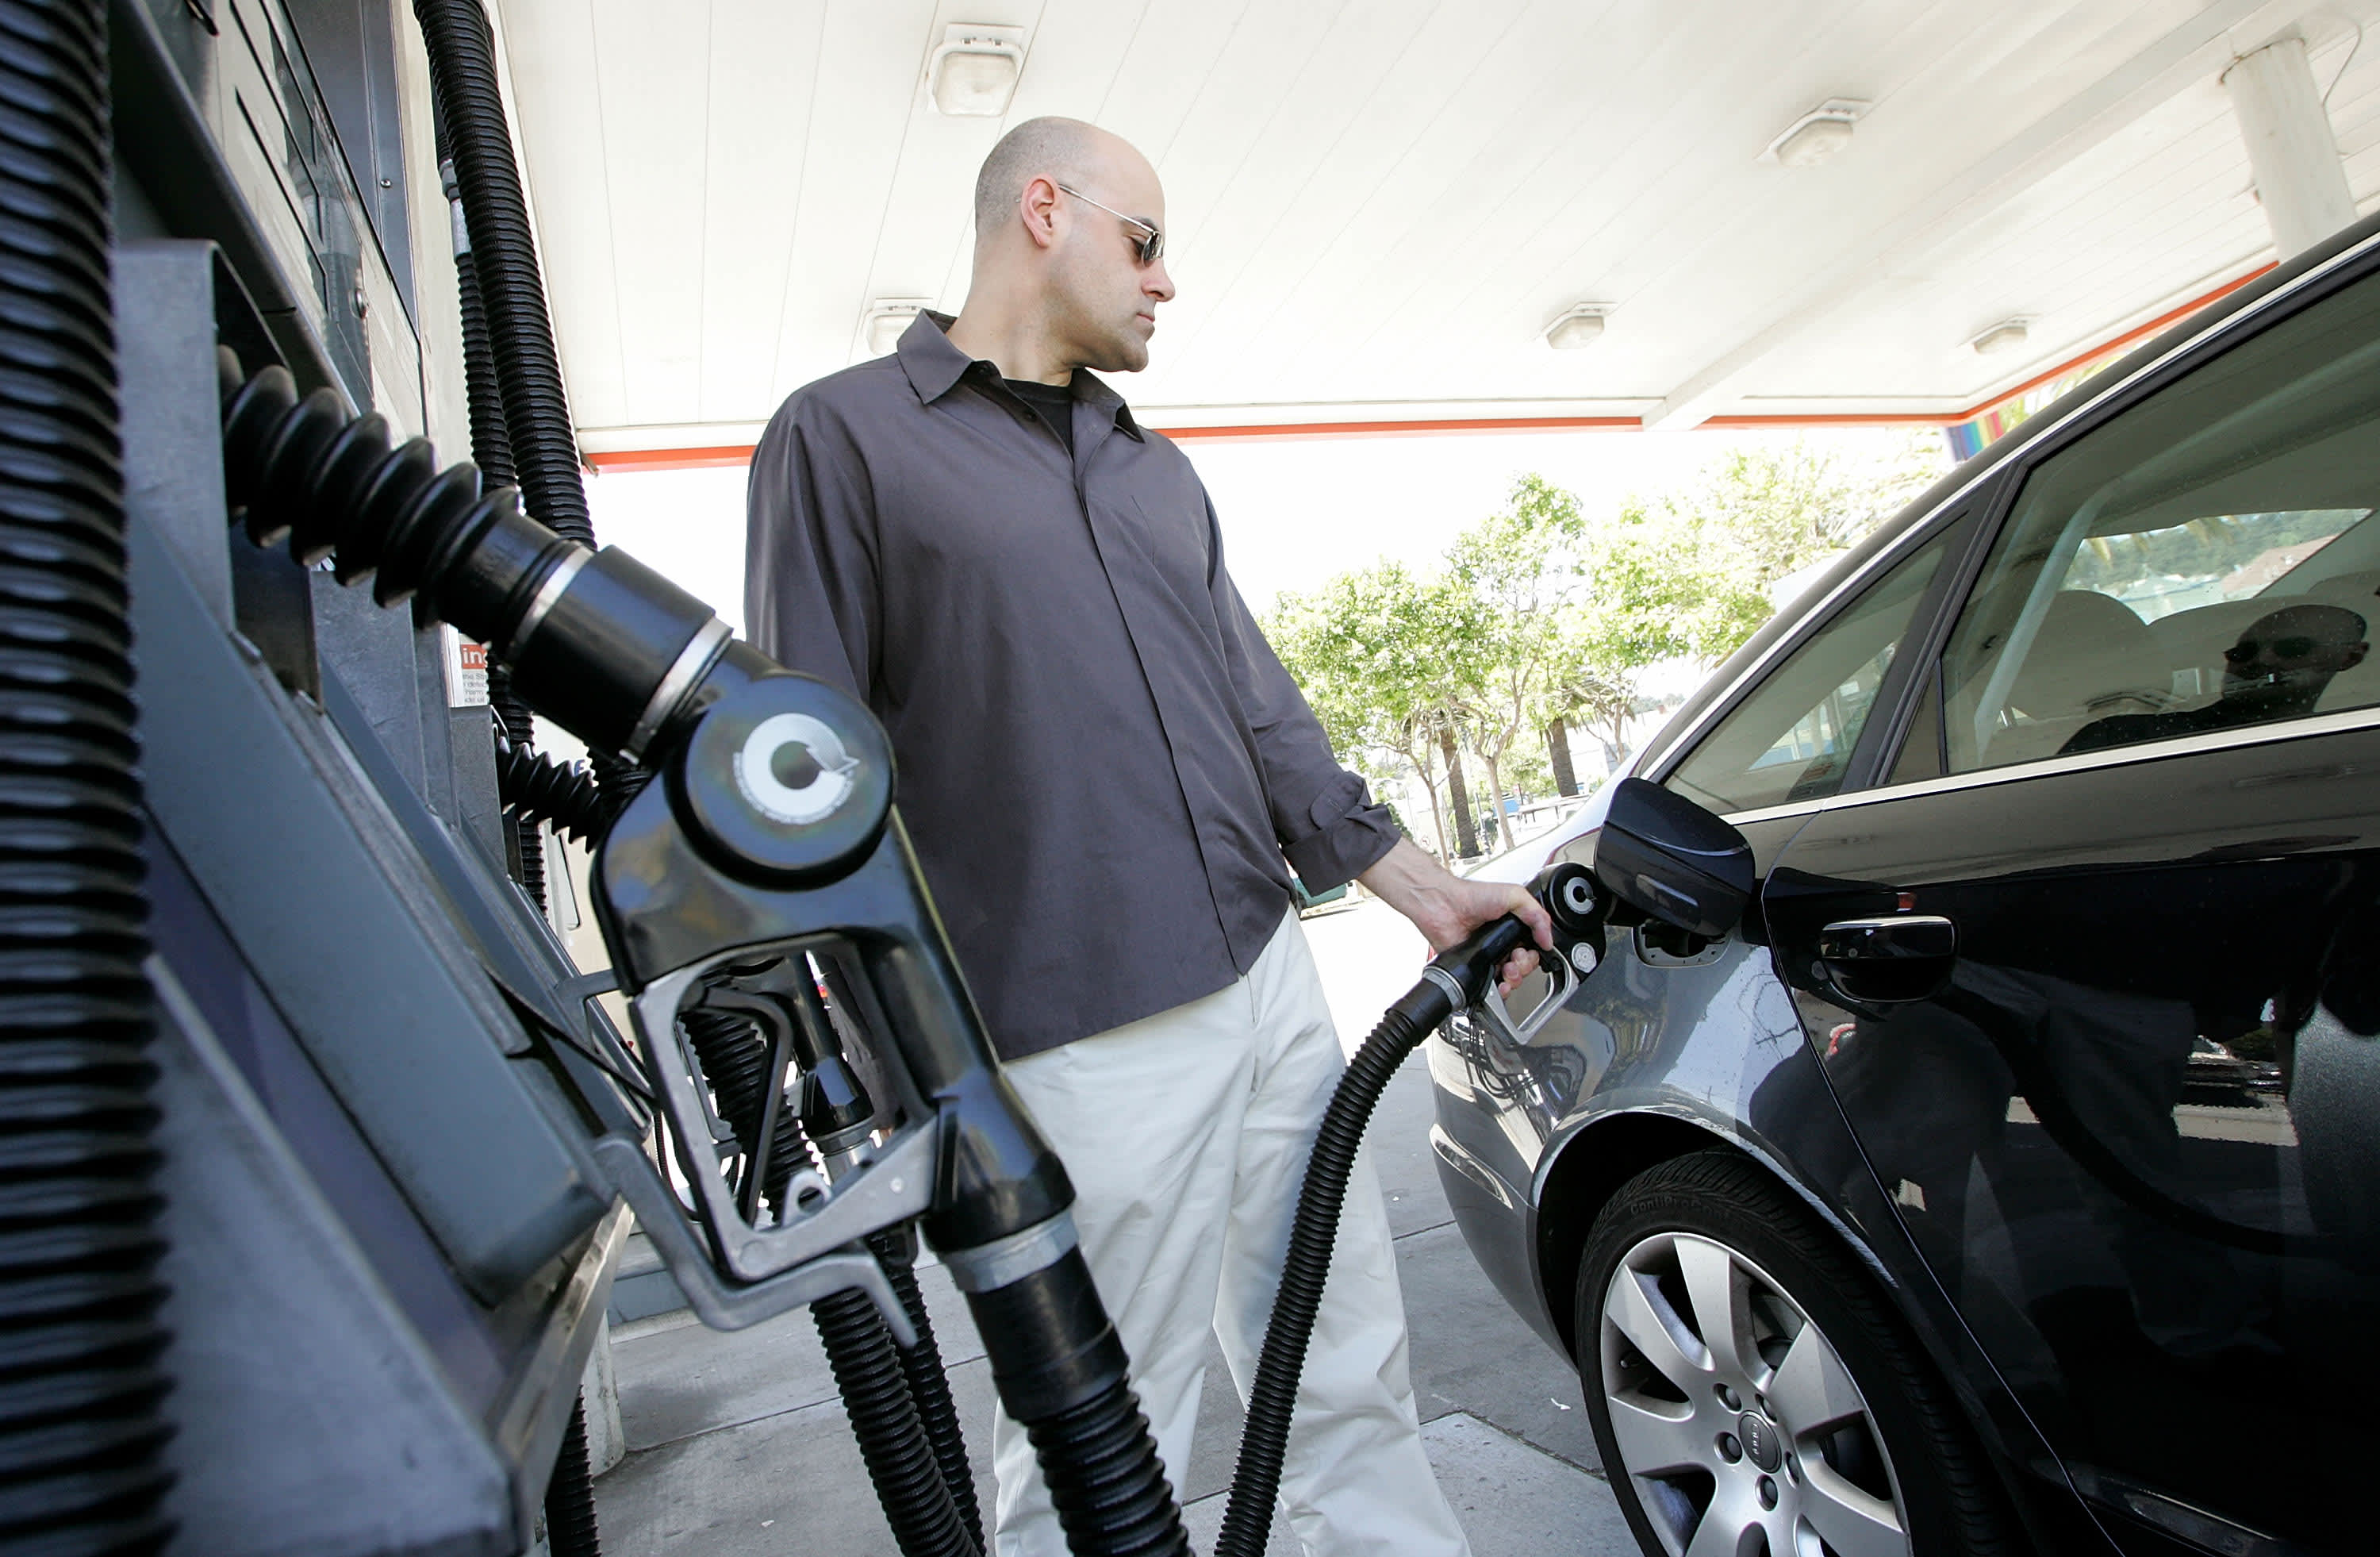 How to find the cheapest gas near you